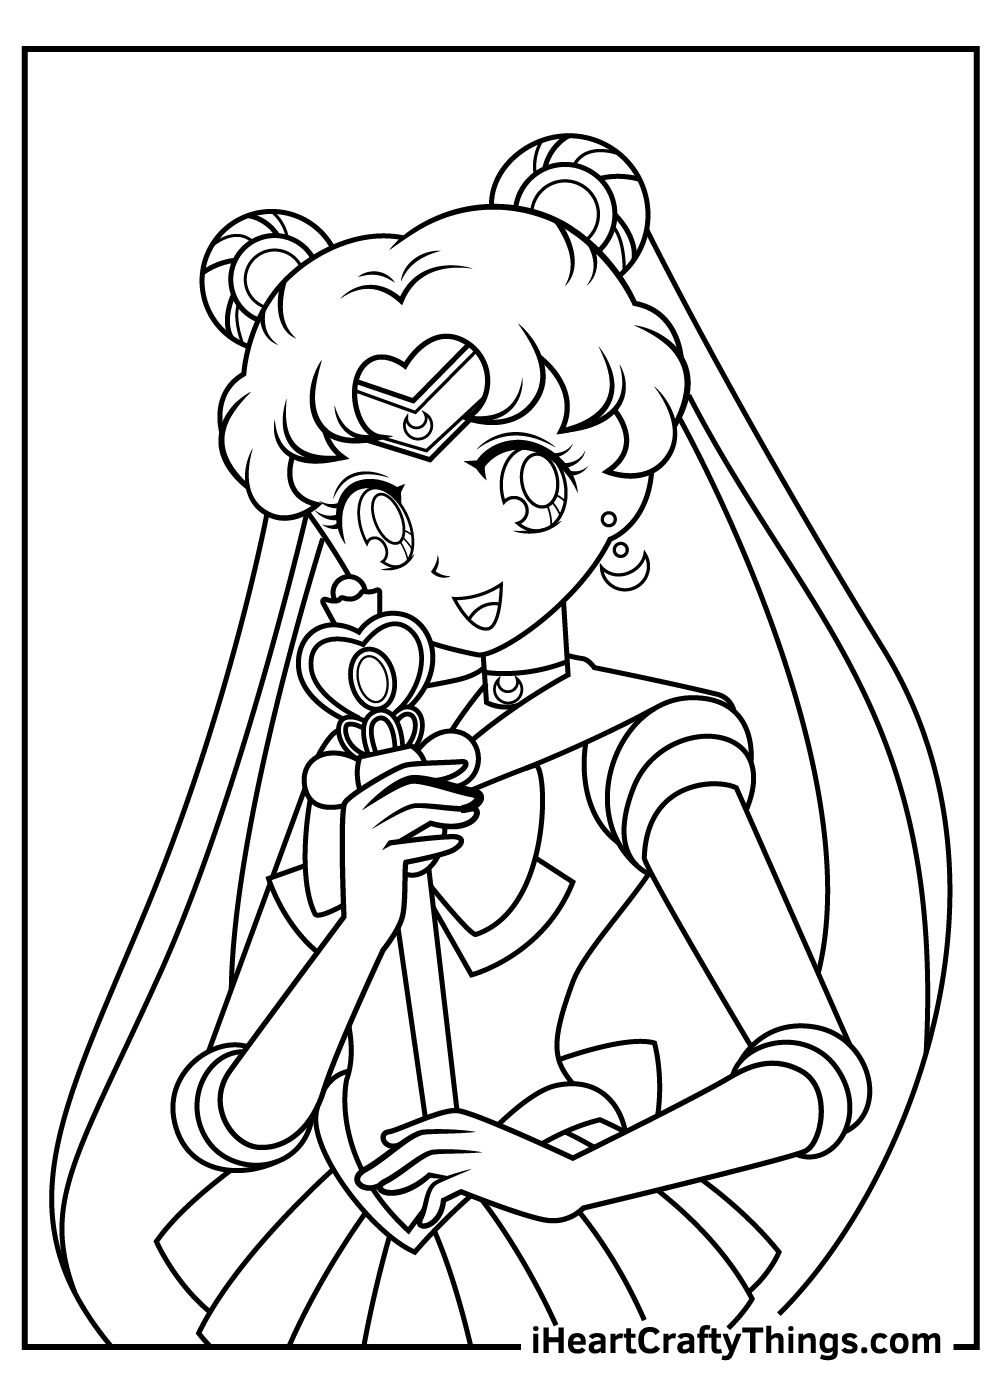 Printable Sailor Moon Coloring Pages Updated 20